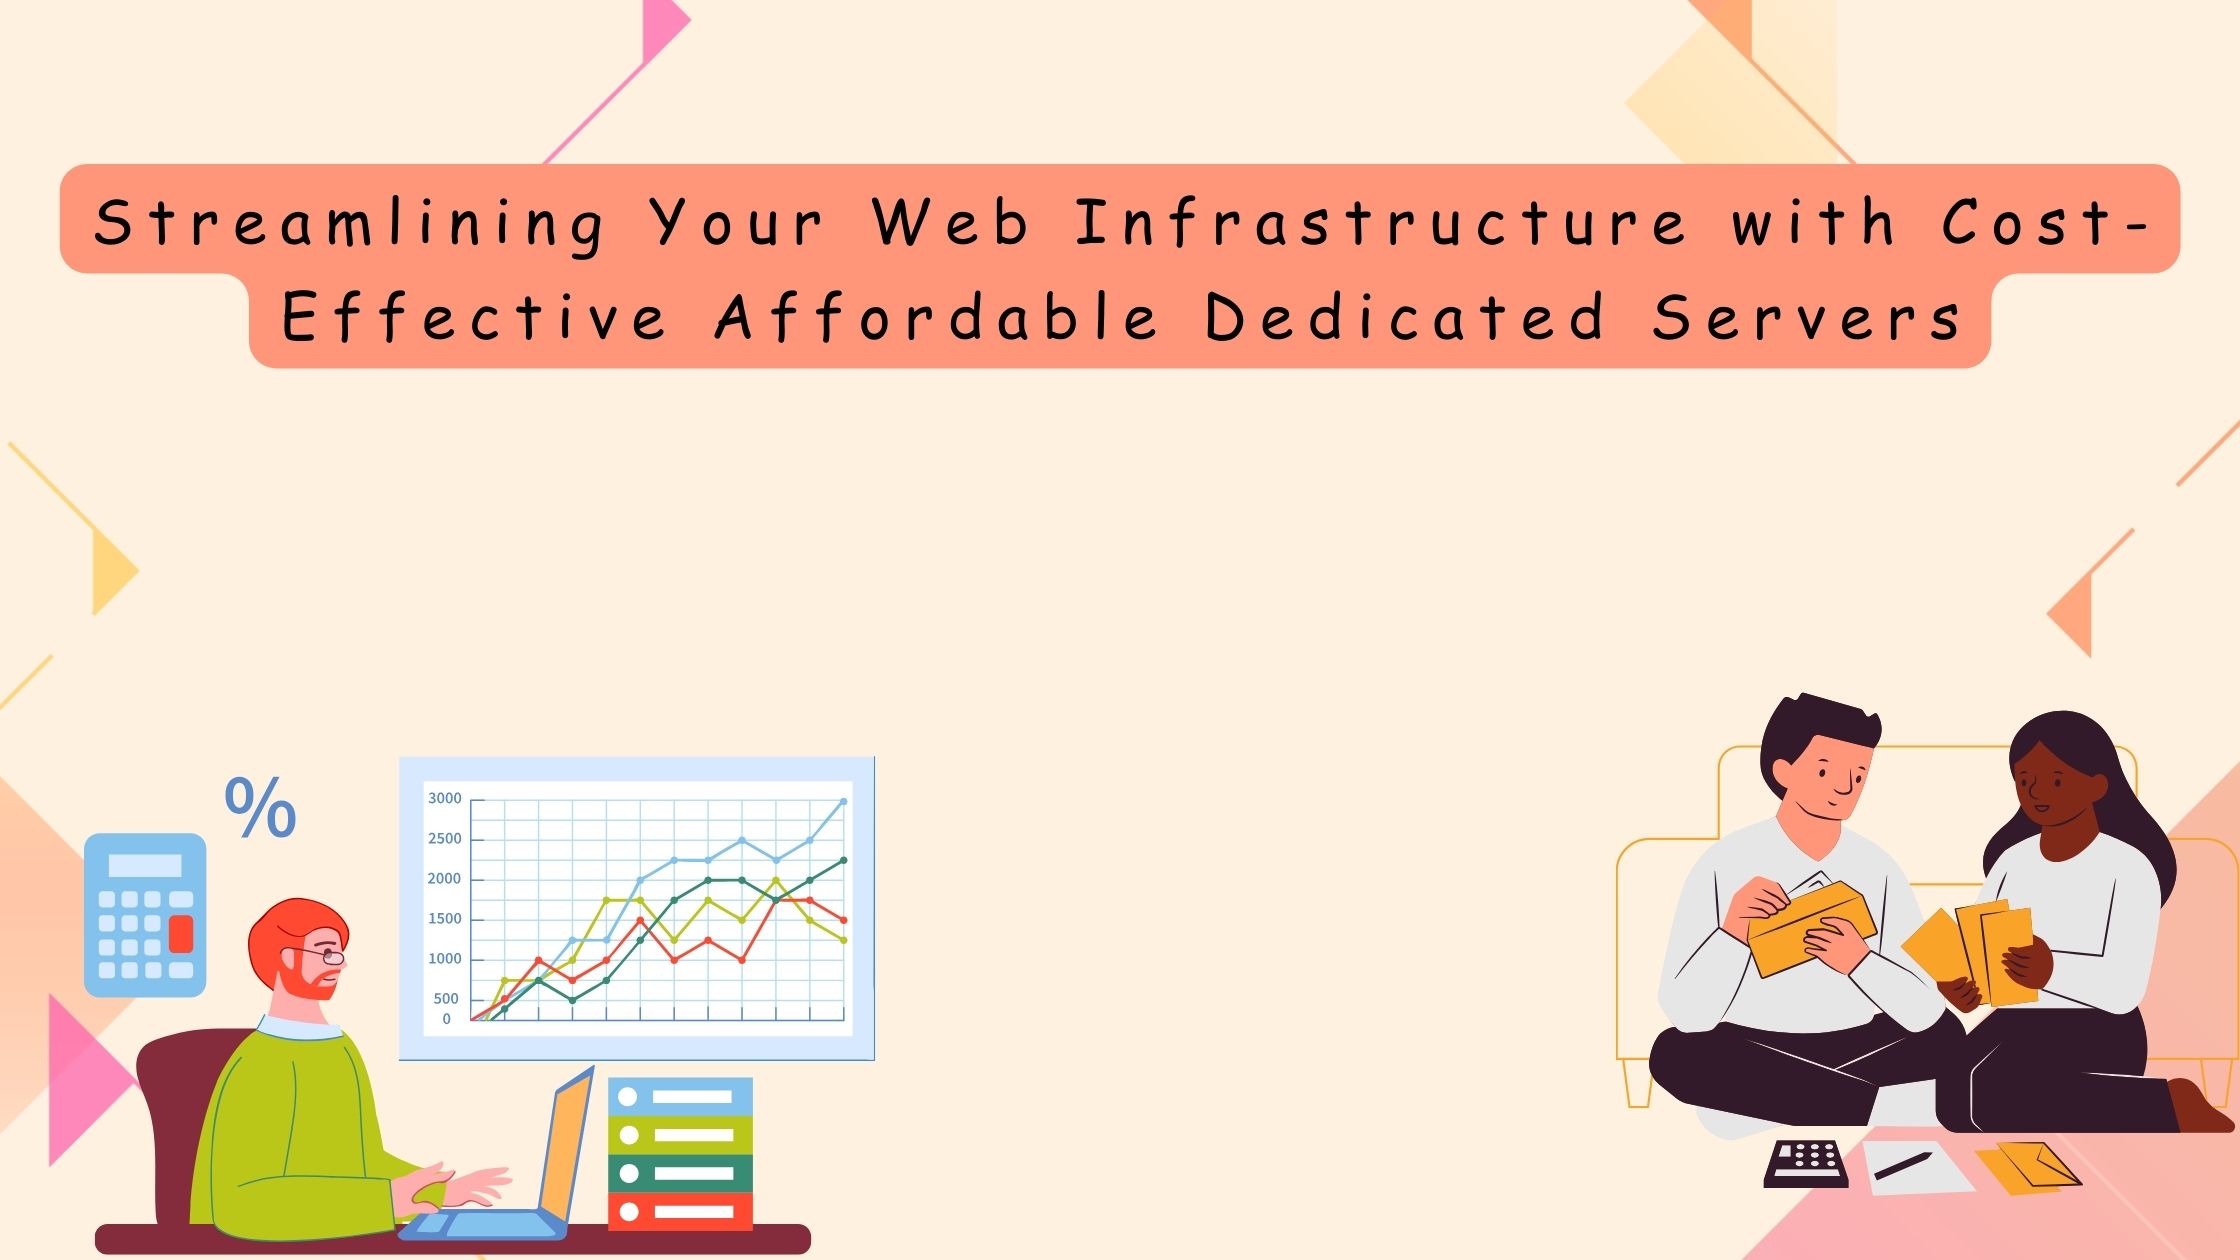 Streamlining Your Web Infrastructure with Cost-Effective Affordable Dedicated Servers